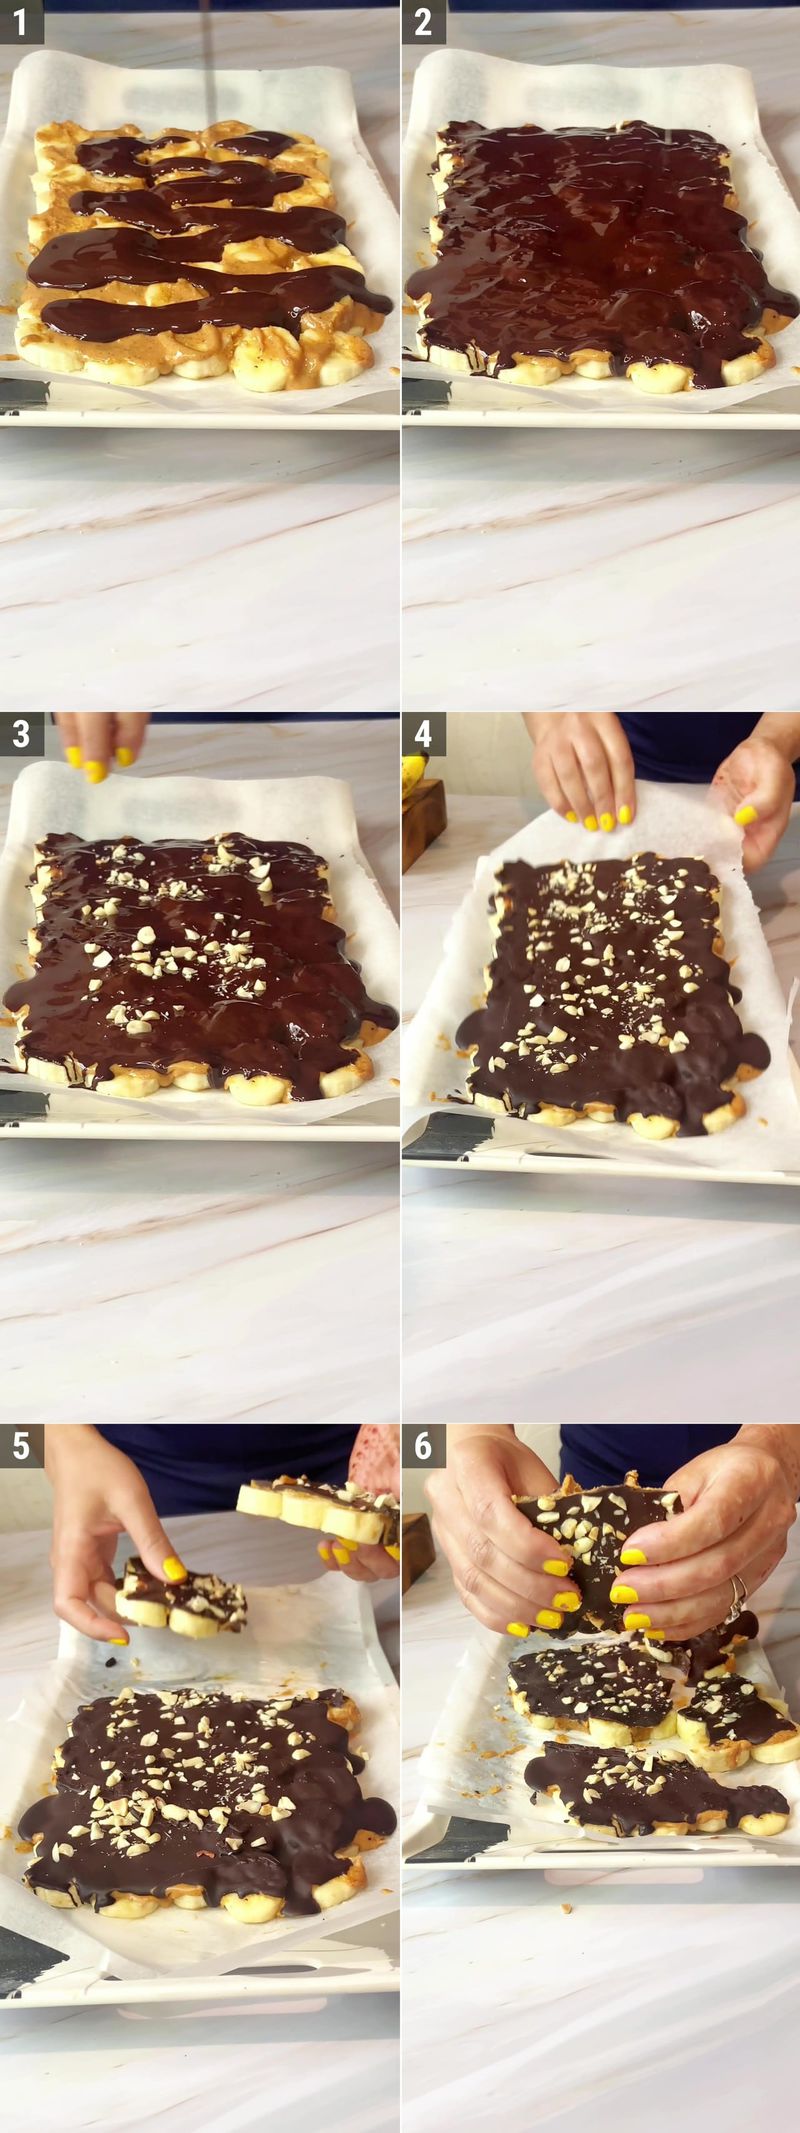 Image of the recipe cooking step-1-3 for Chocolate Banana Bark